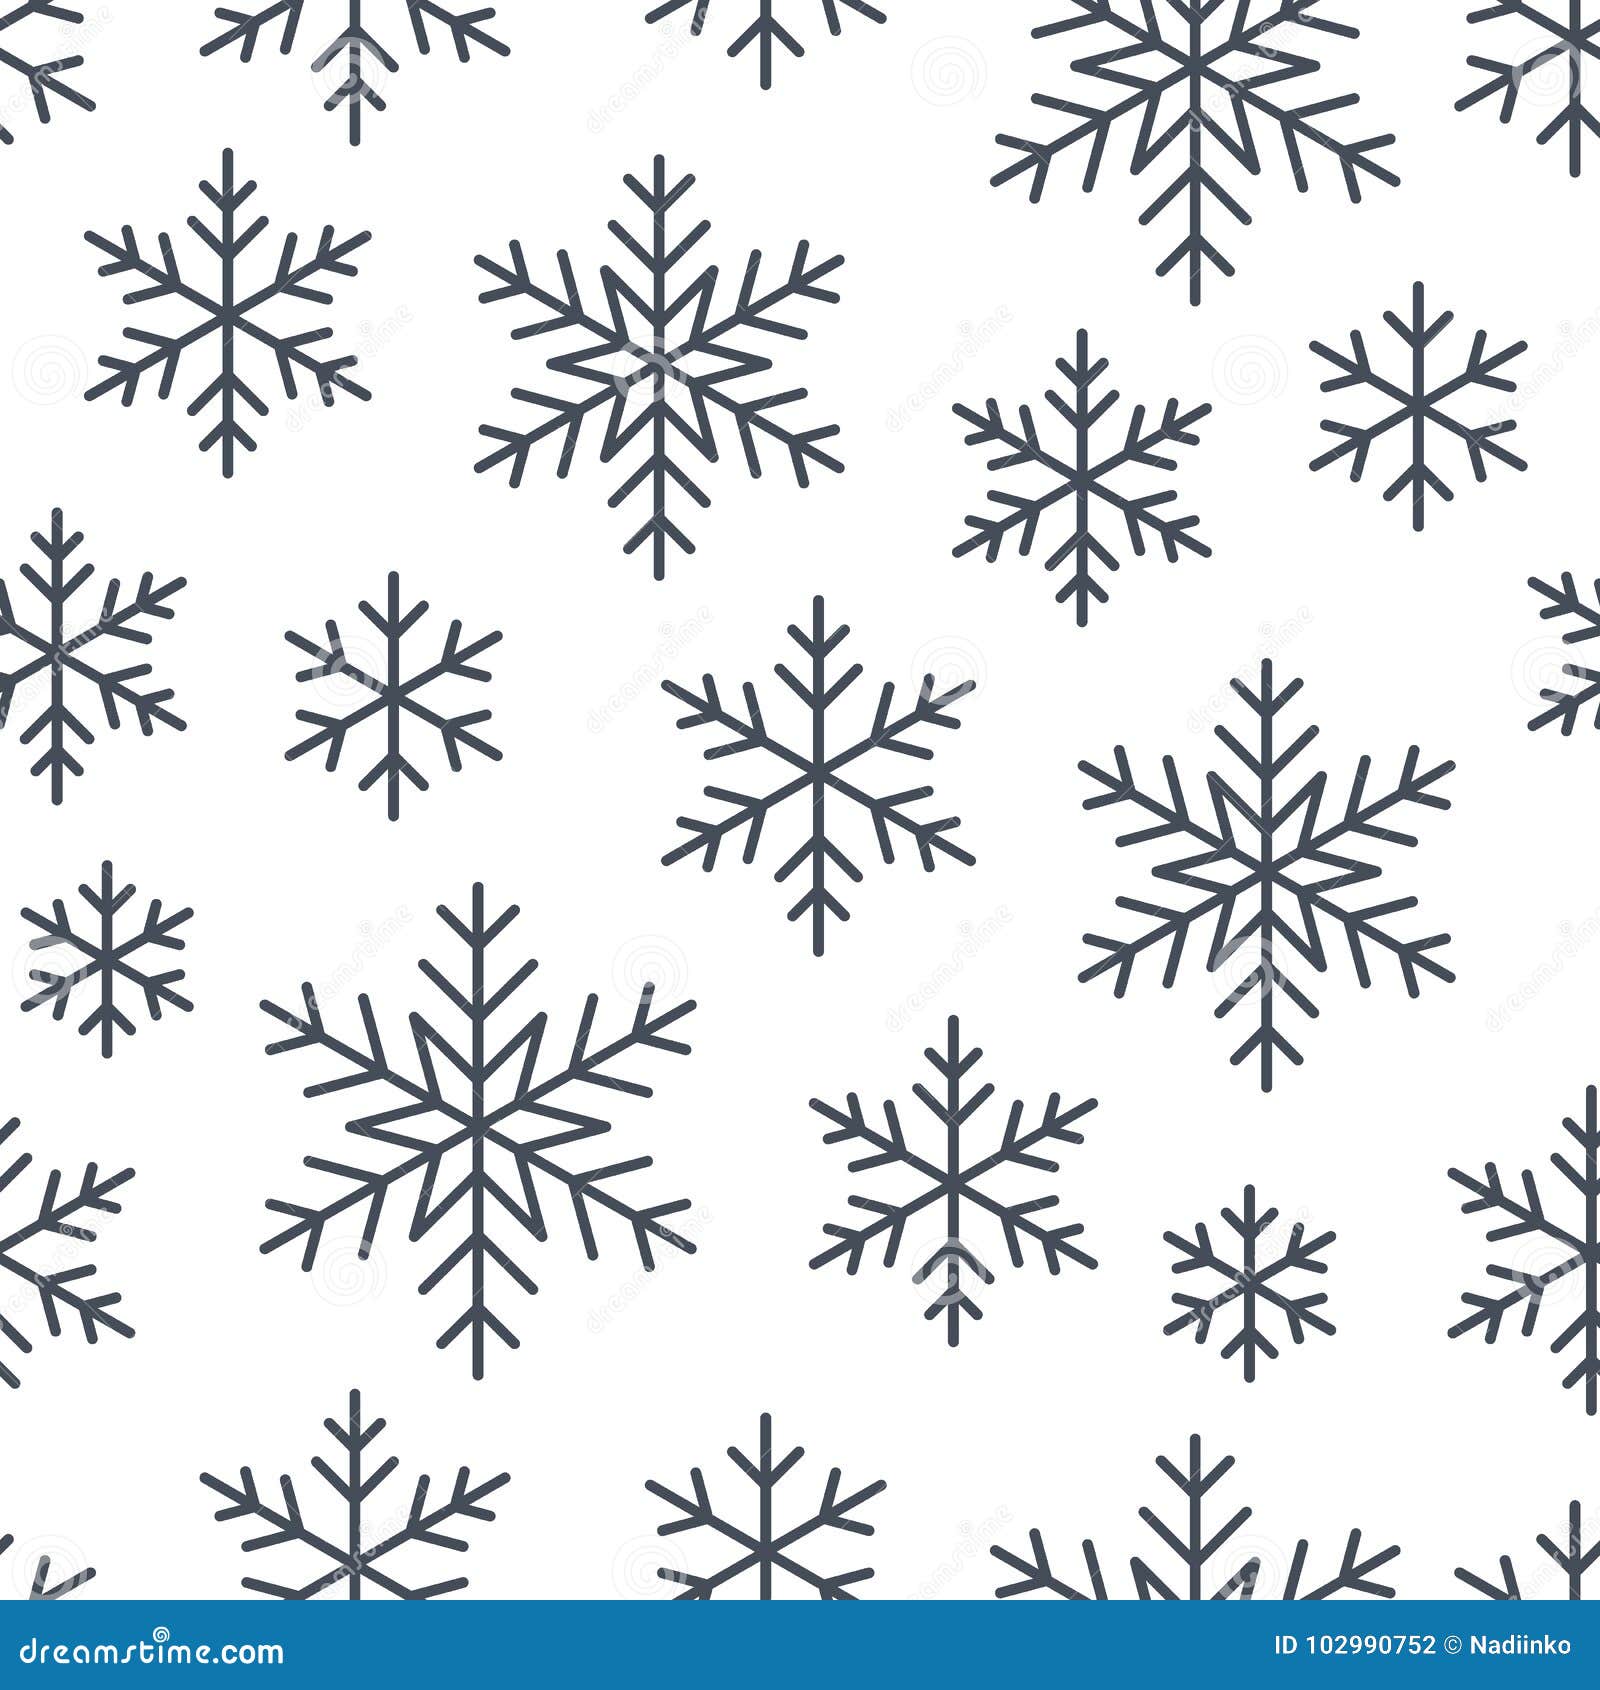 Snow Flakes Pattern Design Layouts, Winter Frozen Icon Variations